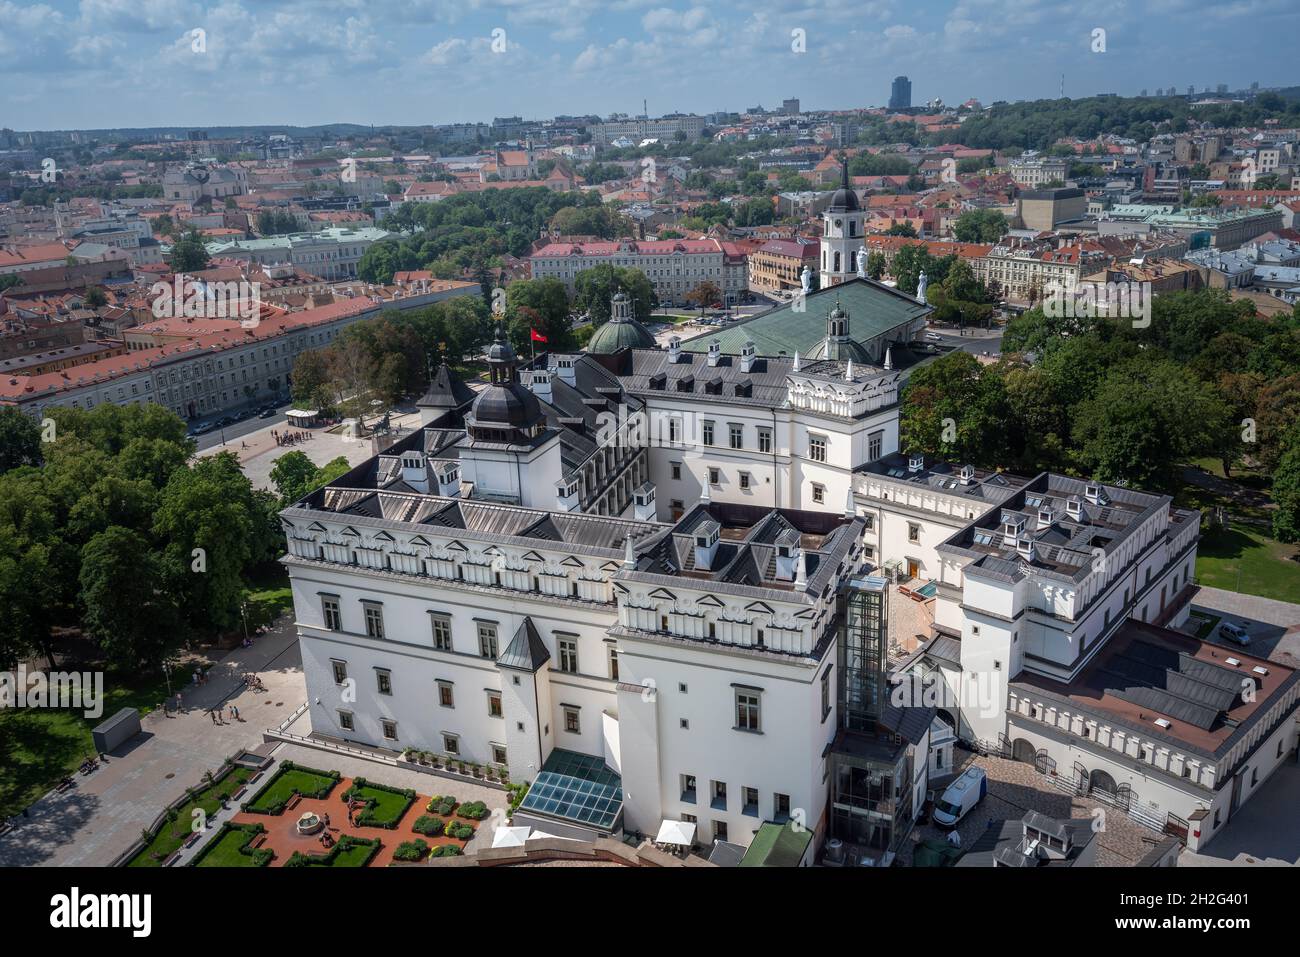 Aerial view of the Palace of the Grand Dukes of Lithuania - Vilnius, Lithuania Stock Photo